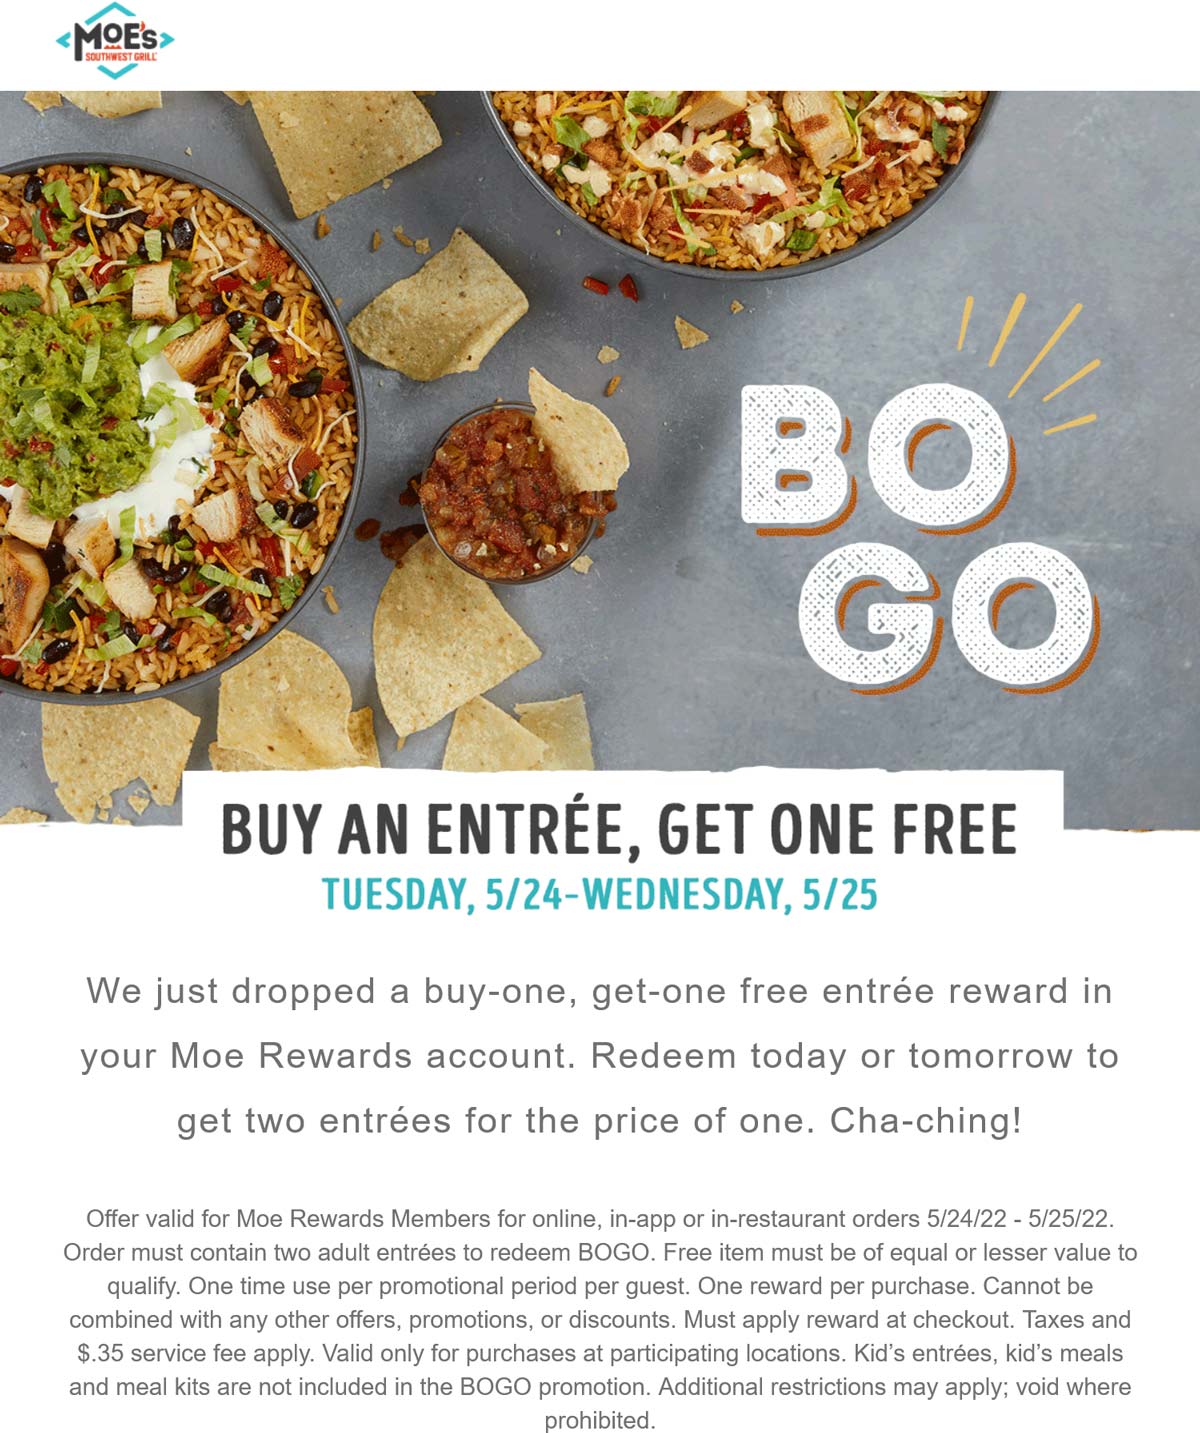 Moes Southwest Grill restaurants Coupon  Second entree free at Moes Southwest Grill, or online via promo code BOGO #moessouthwestgrill 